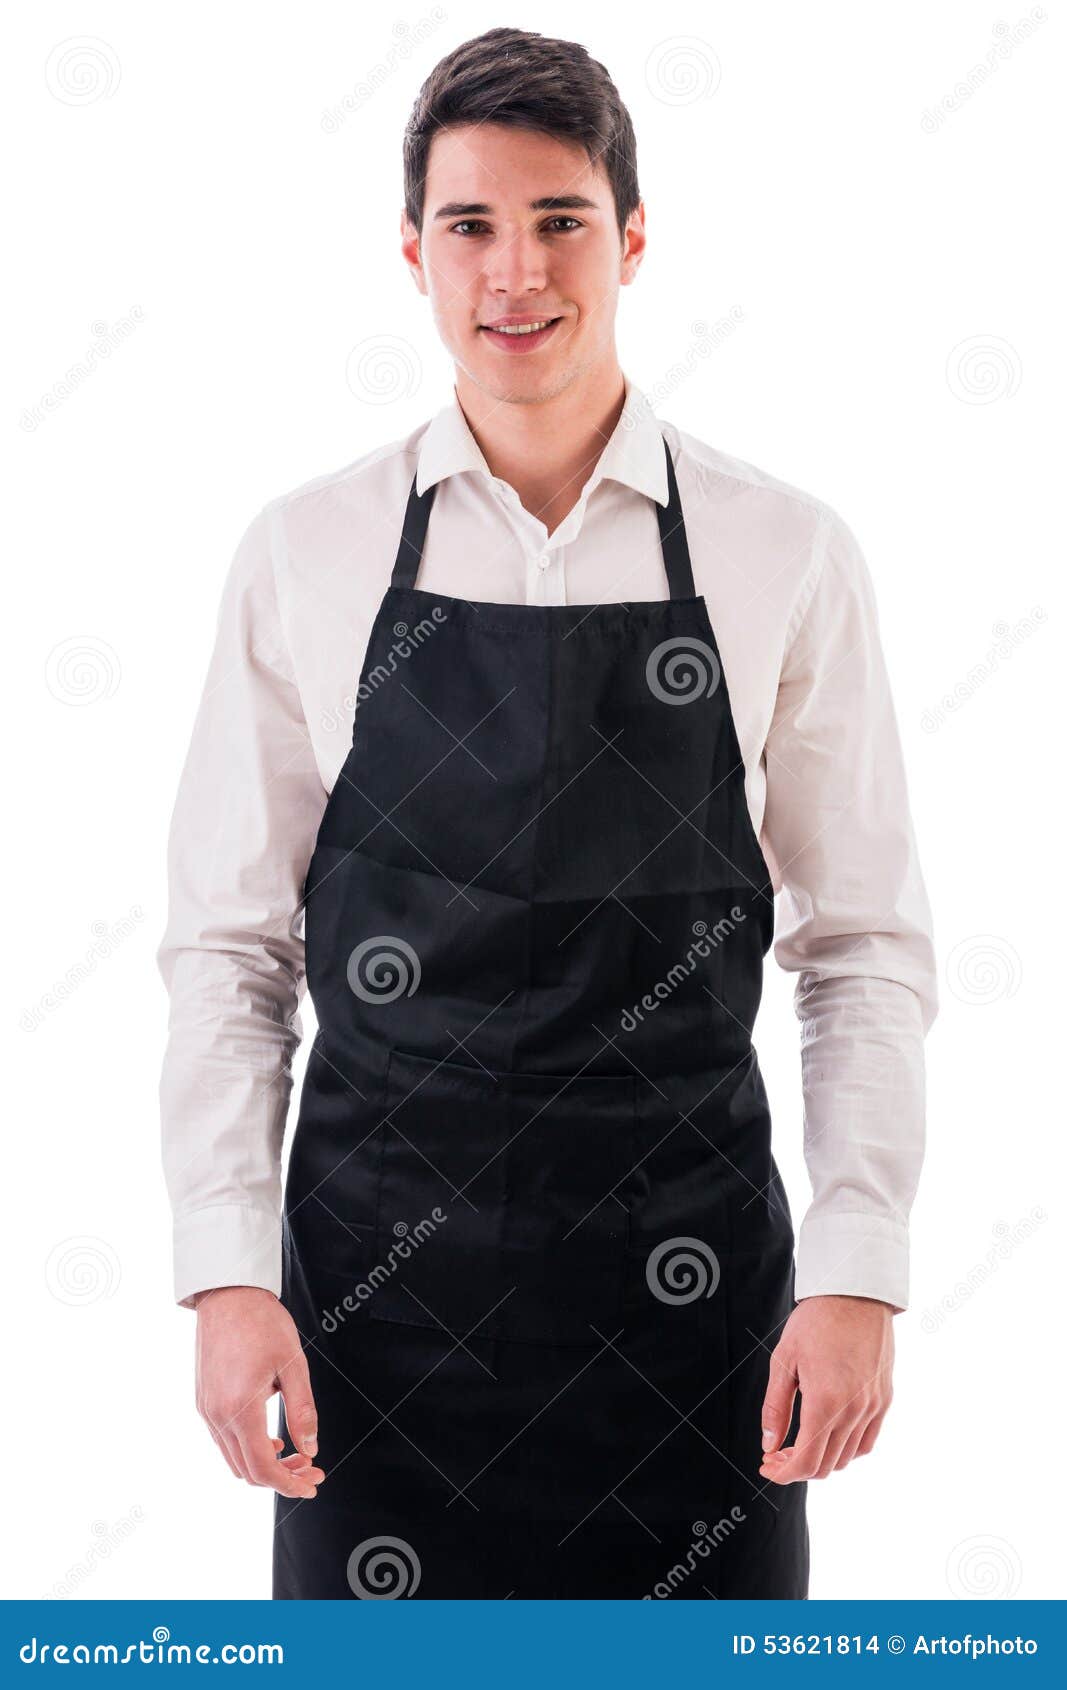 young chef or waiter wearing black apron 